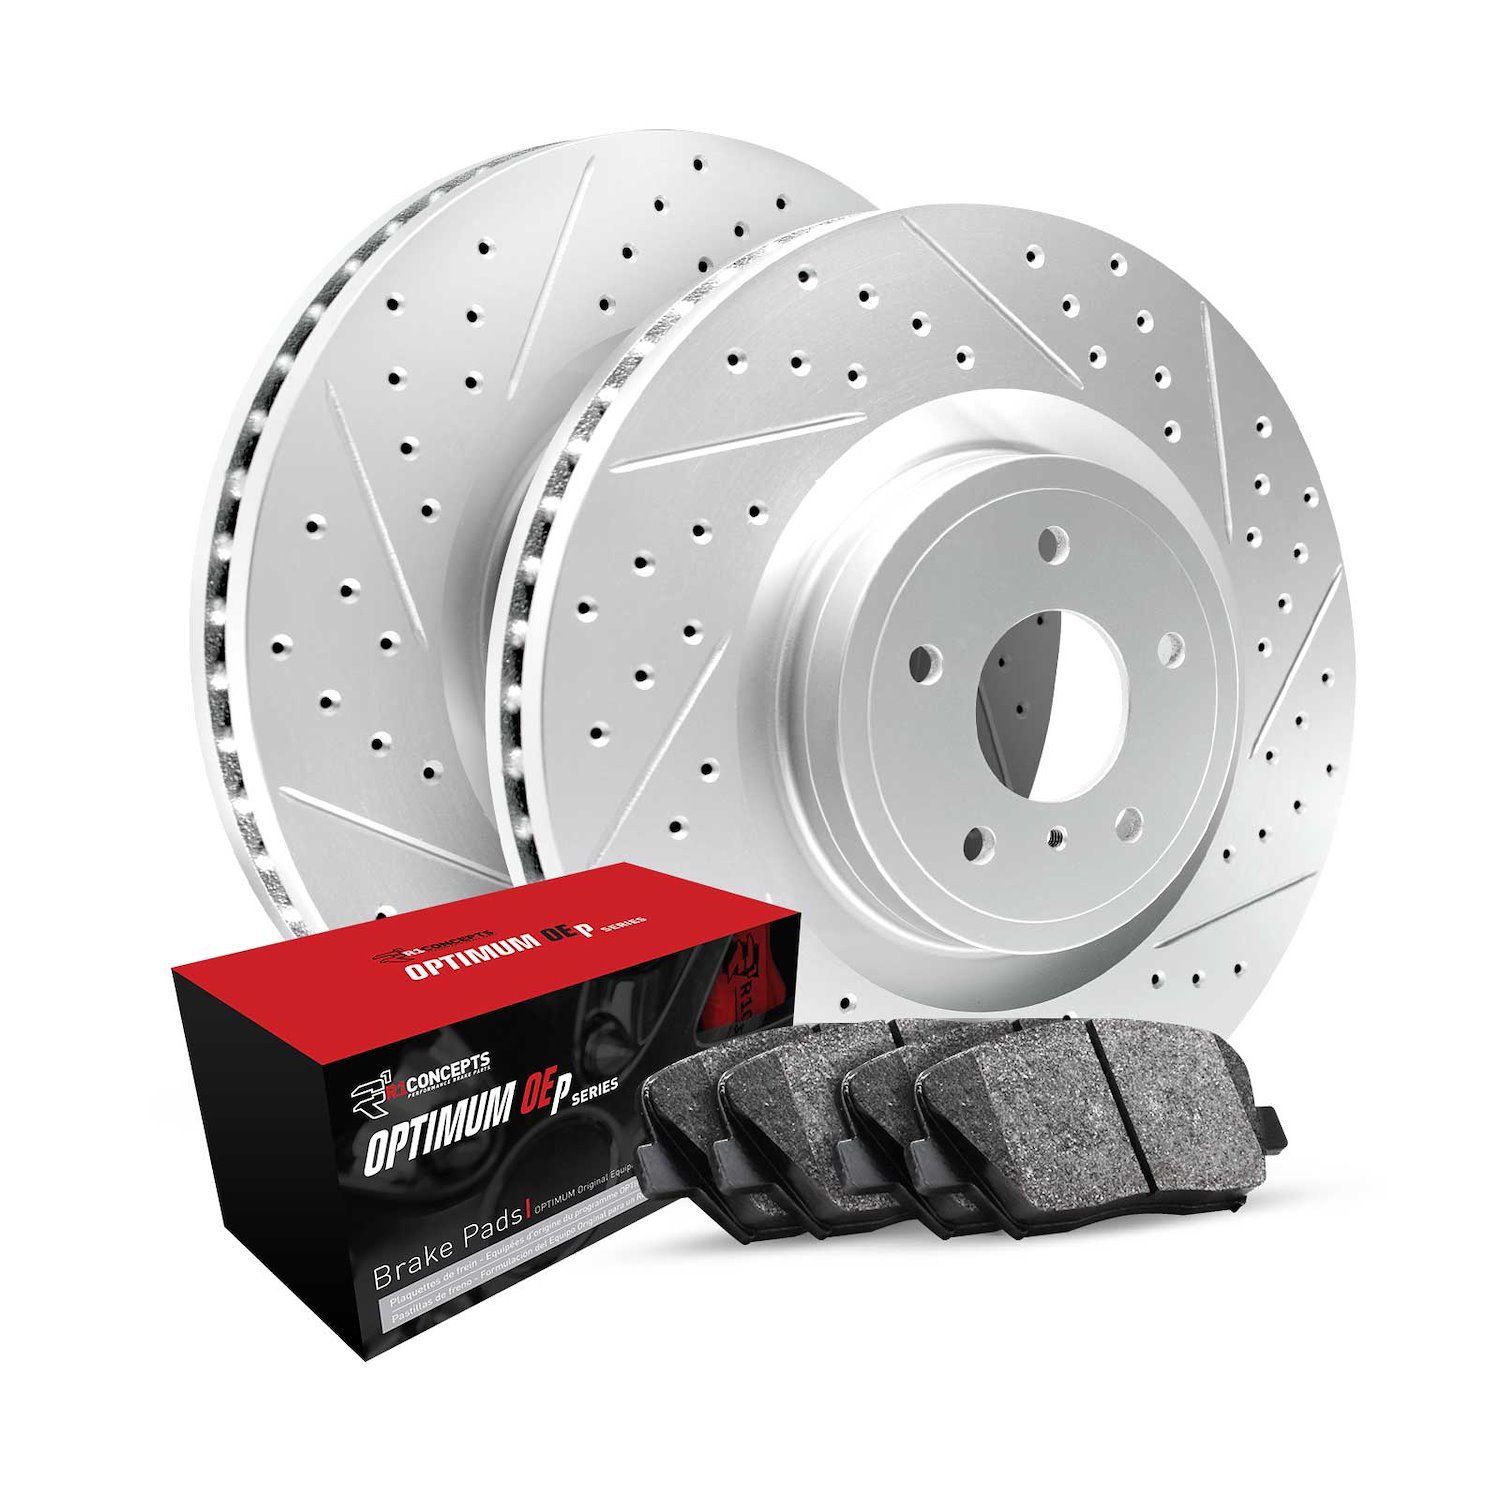 GEO-Carbon Drilled/Slotted Rotors w/Optimum OE Pads, Fits Select Infiniti/Nissan, Position: Rear